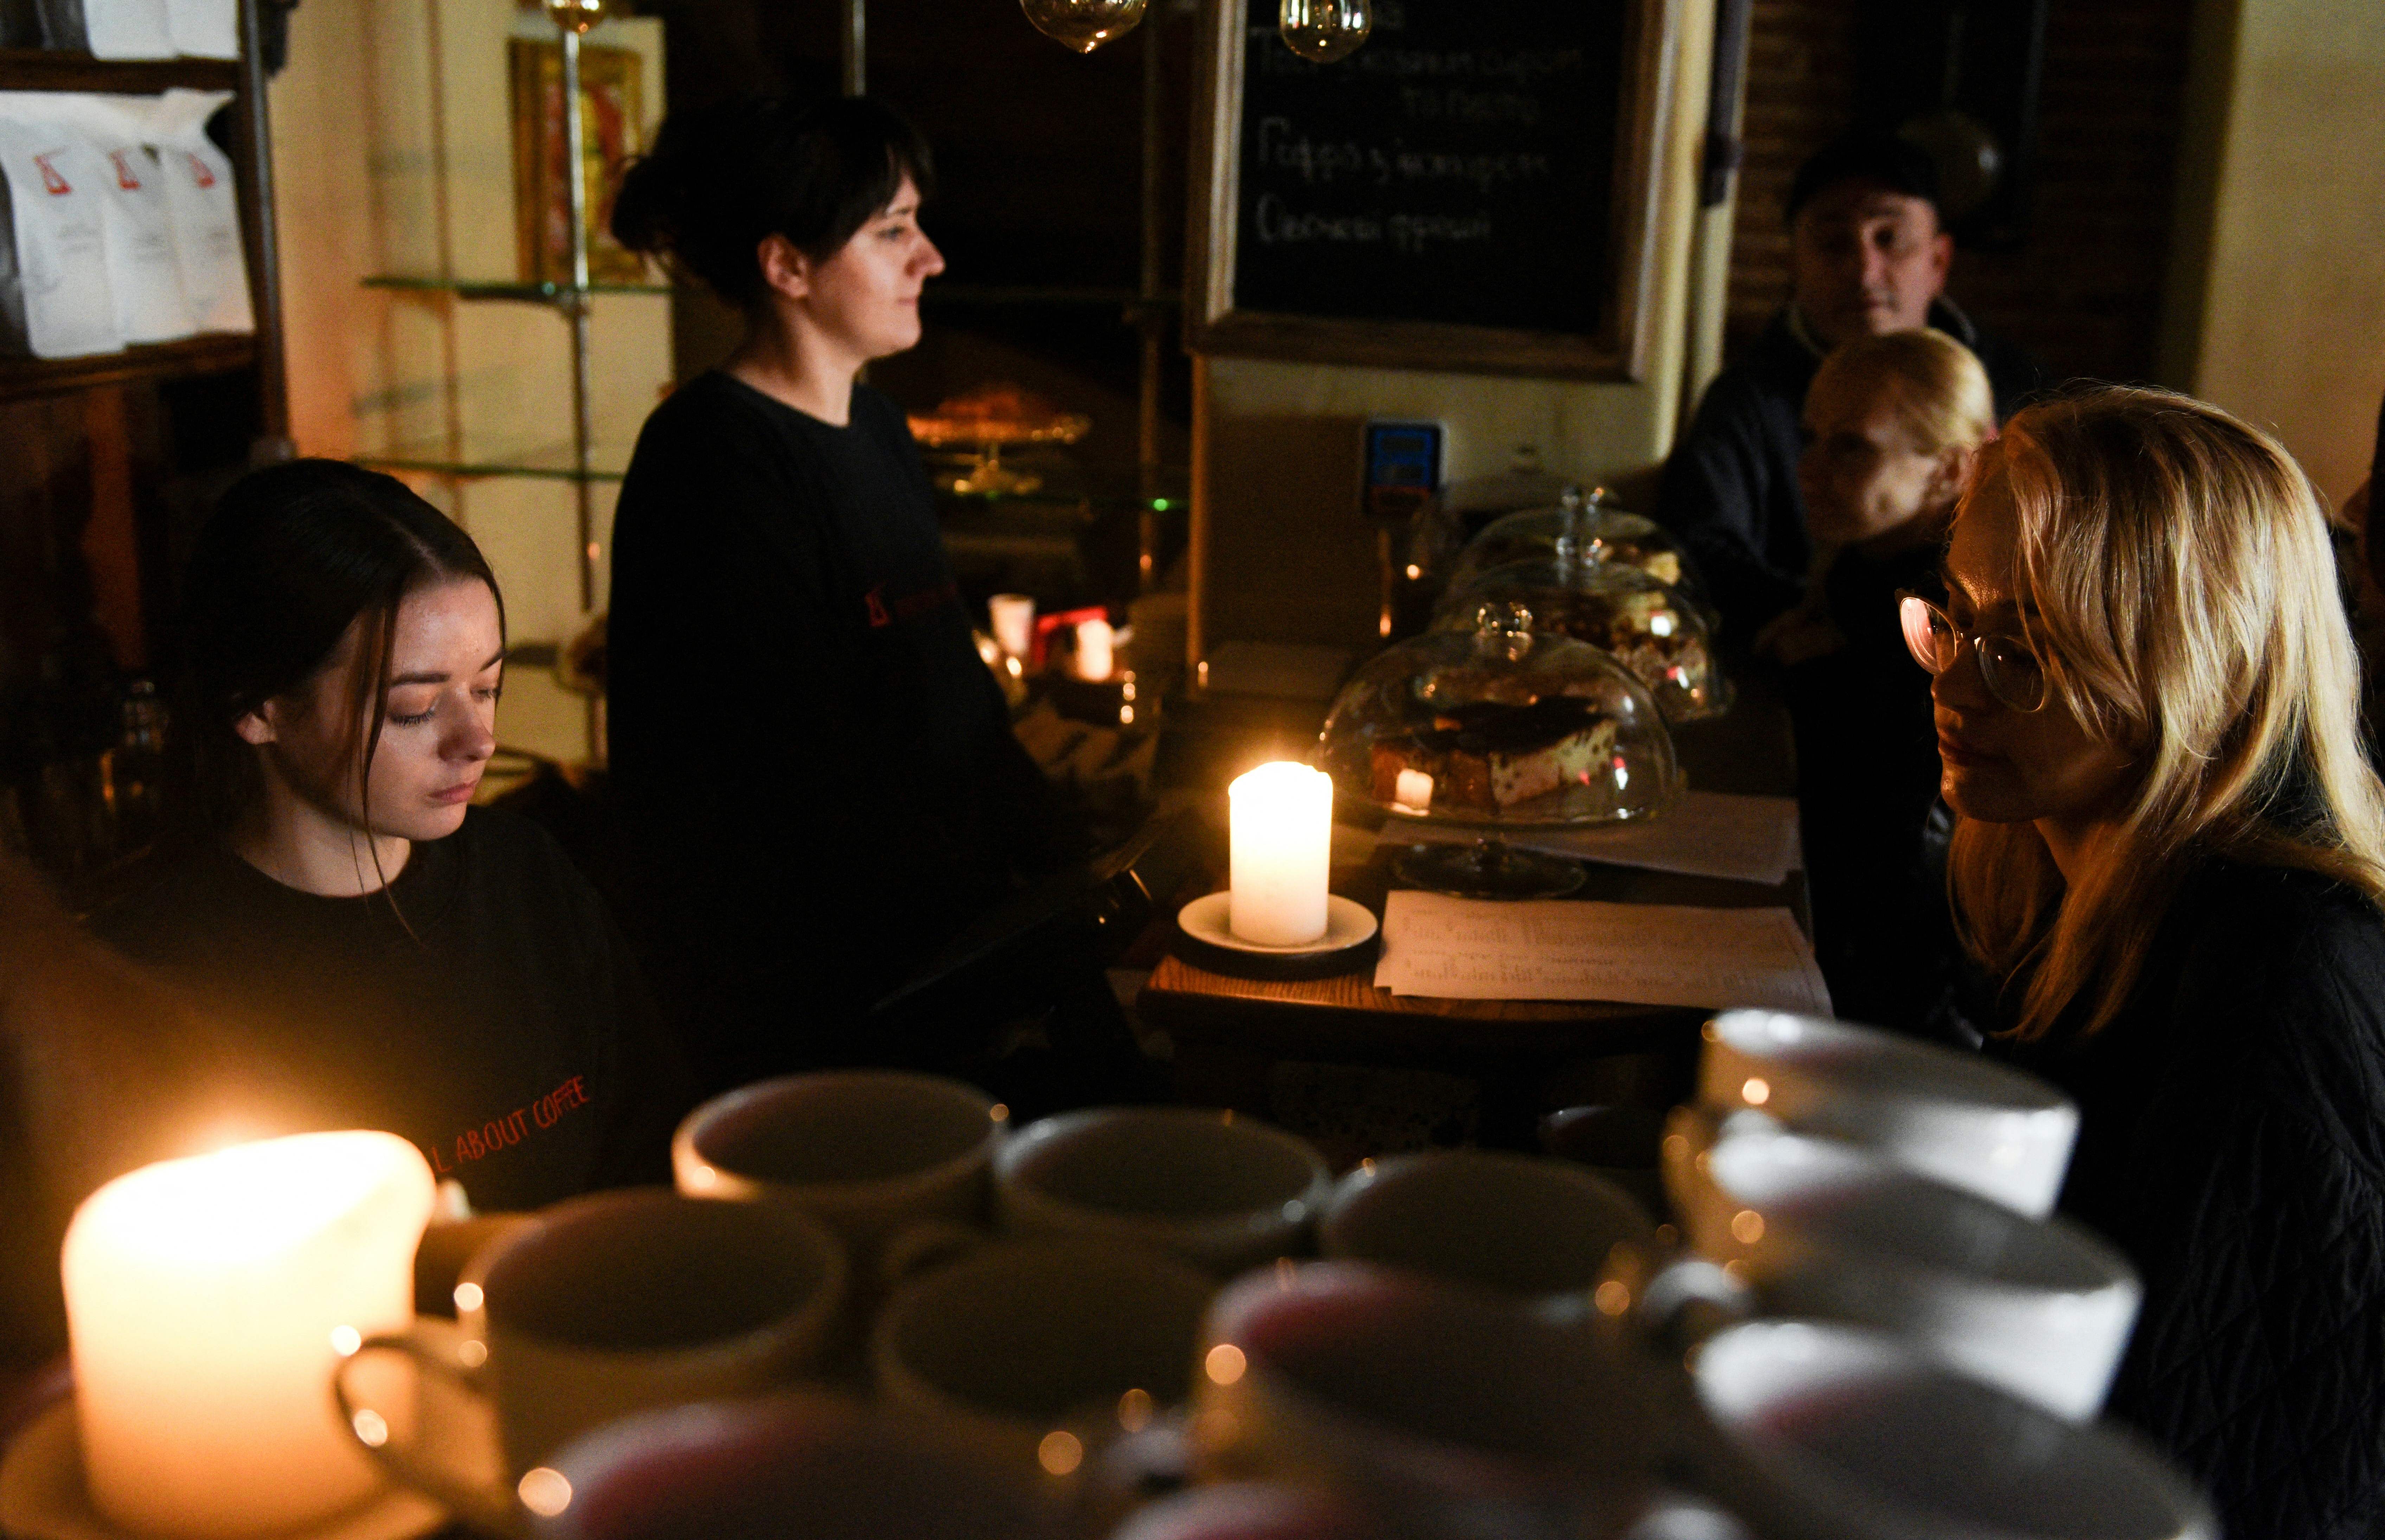 Employees of a cafe serve visitors in a cafe without electricity in Lviv, after three Russian missiles fired targeted energy infrastructure on October 11.